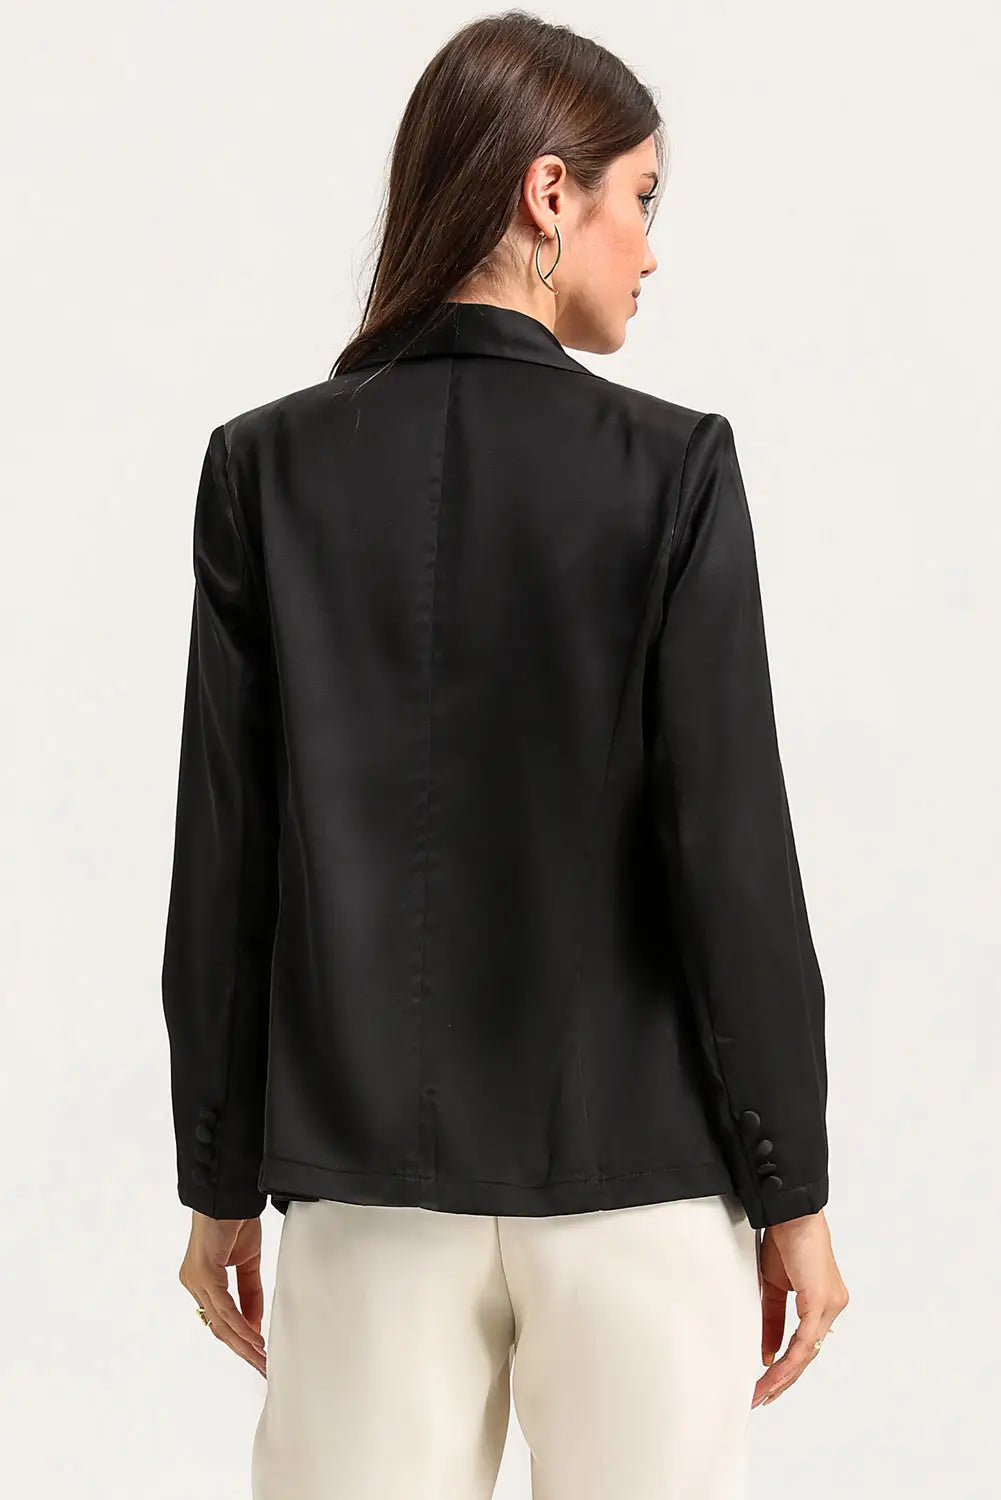 Black collared neck single breasted blazer with pockets -